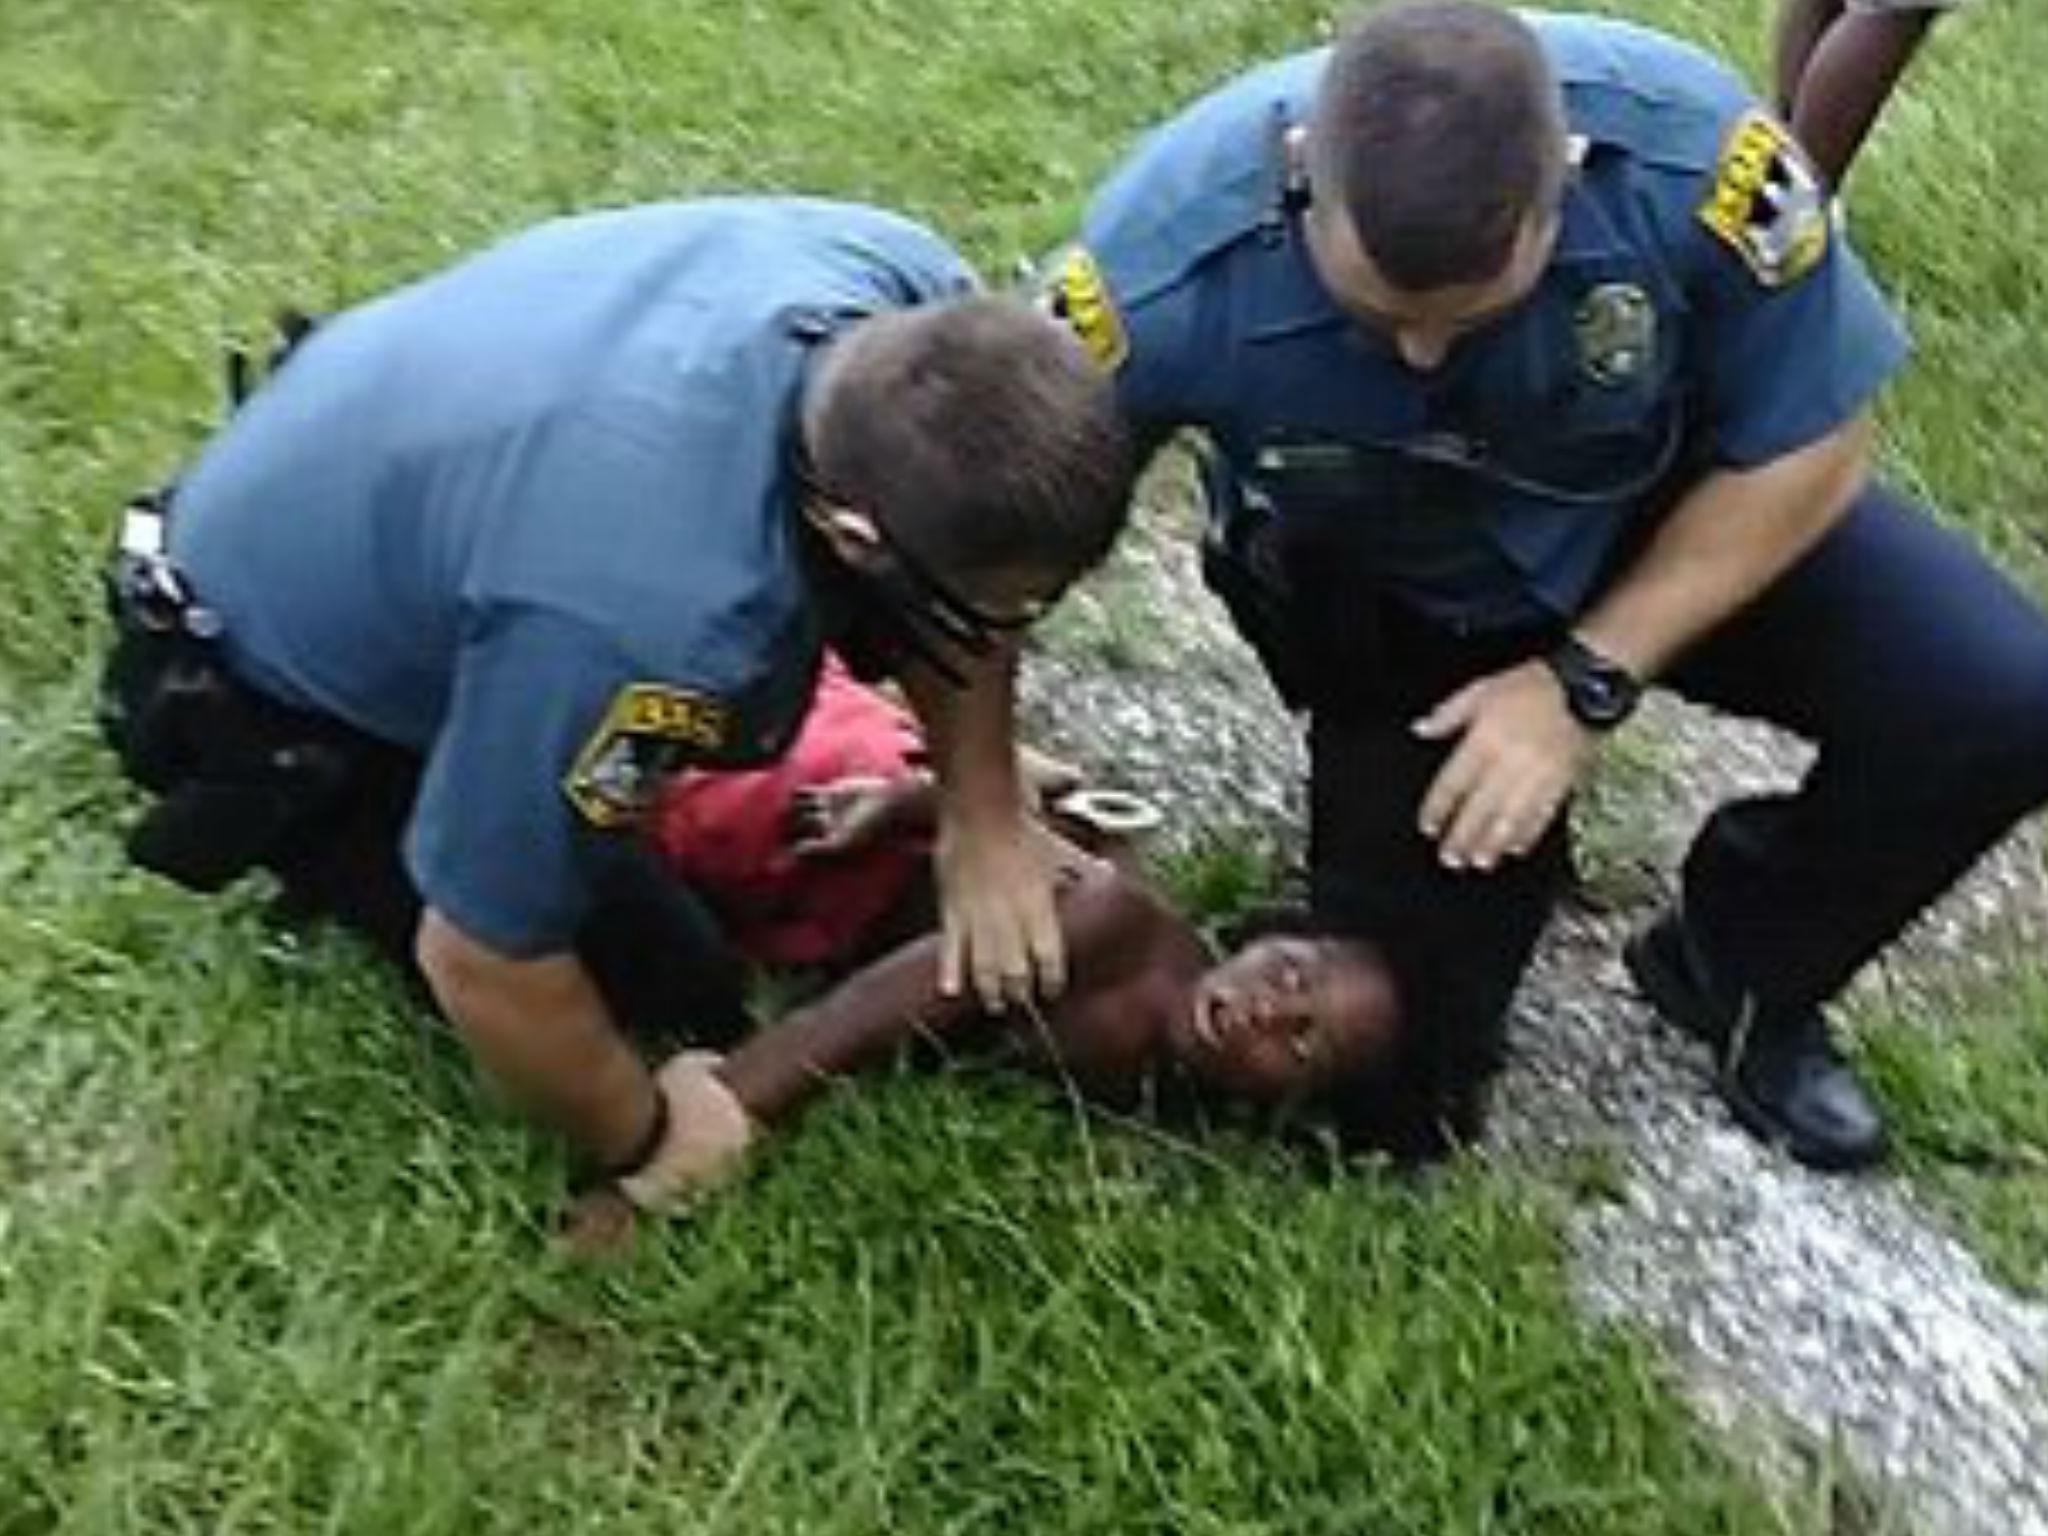 The boy was pinned to the ground during his father's arrest